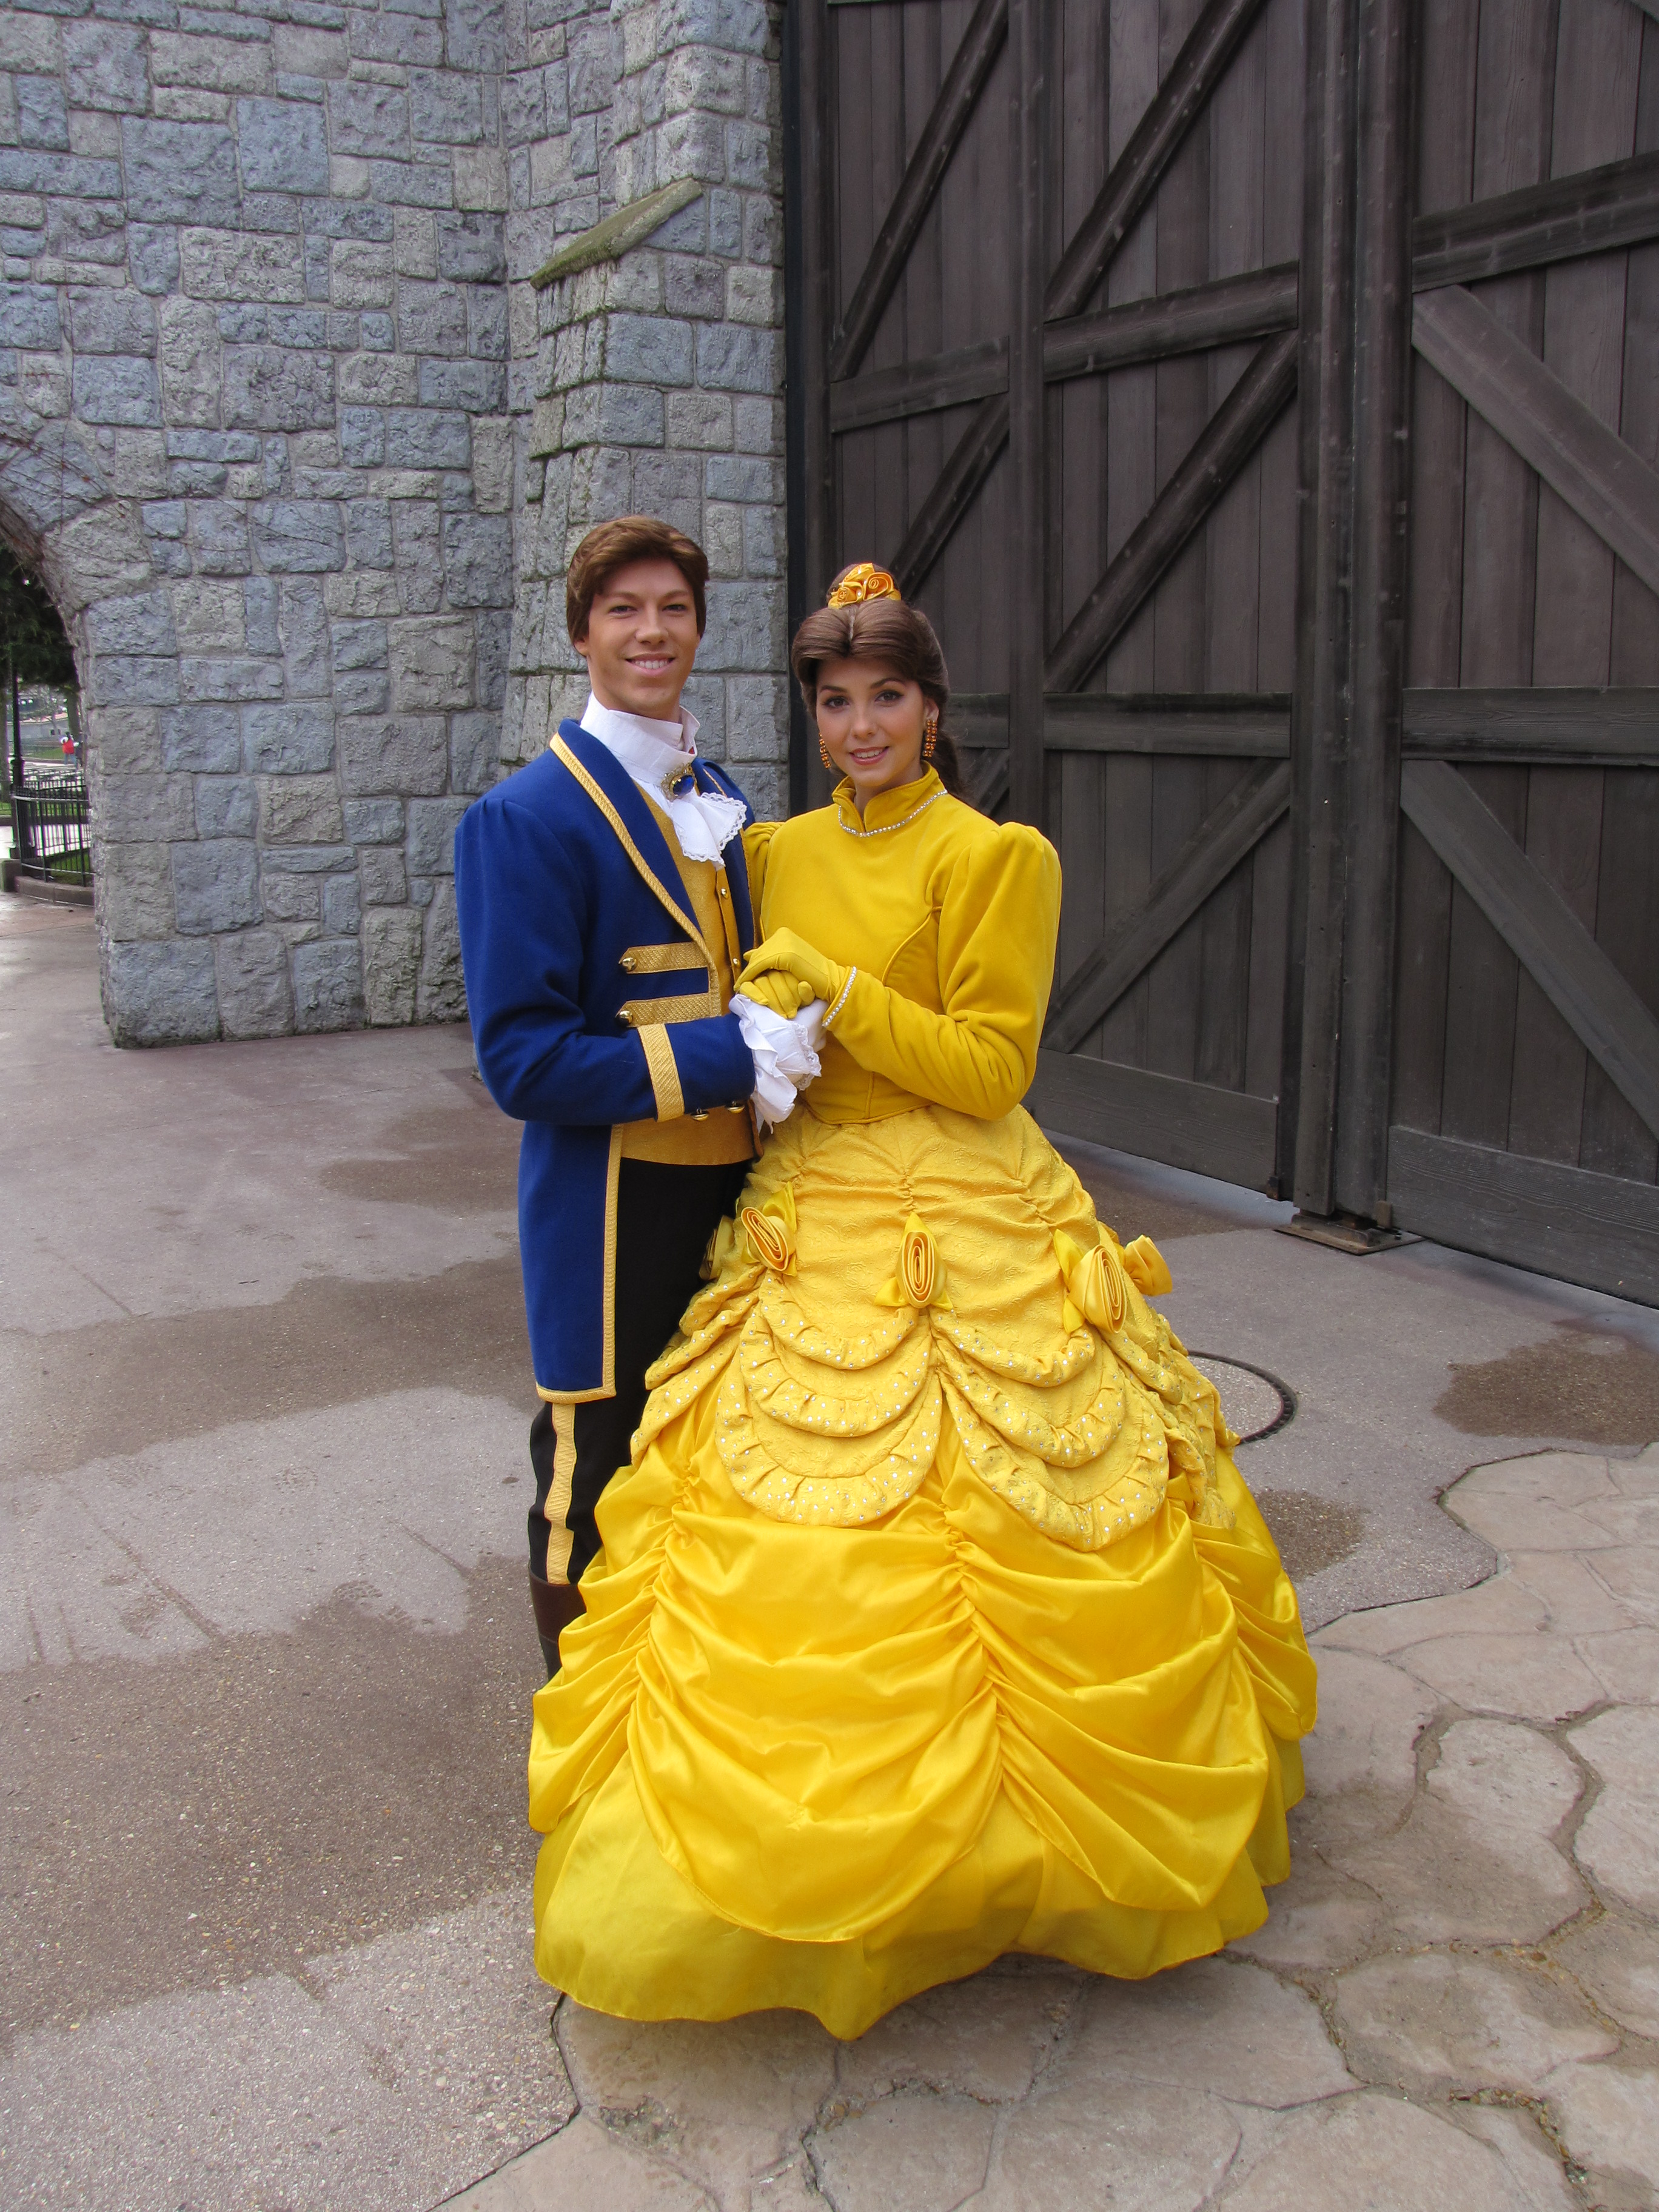 A rare site! Belle together with Prince Adam walking around Fantasyland. While Belle does do Meet'n'Greets Prince Adam is a rare site in the Park.